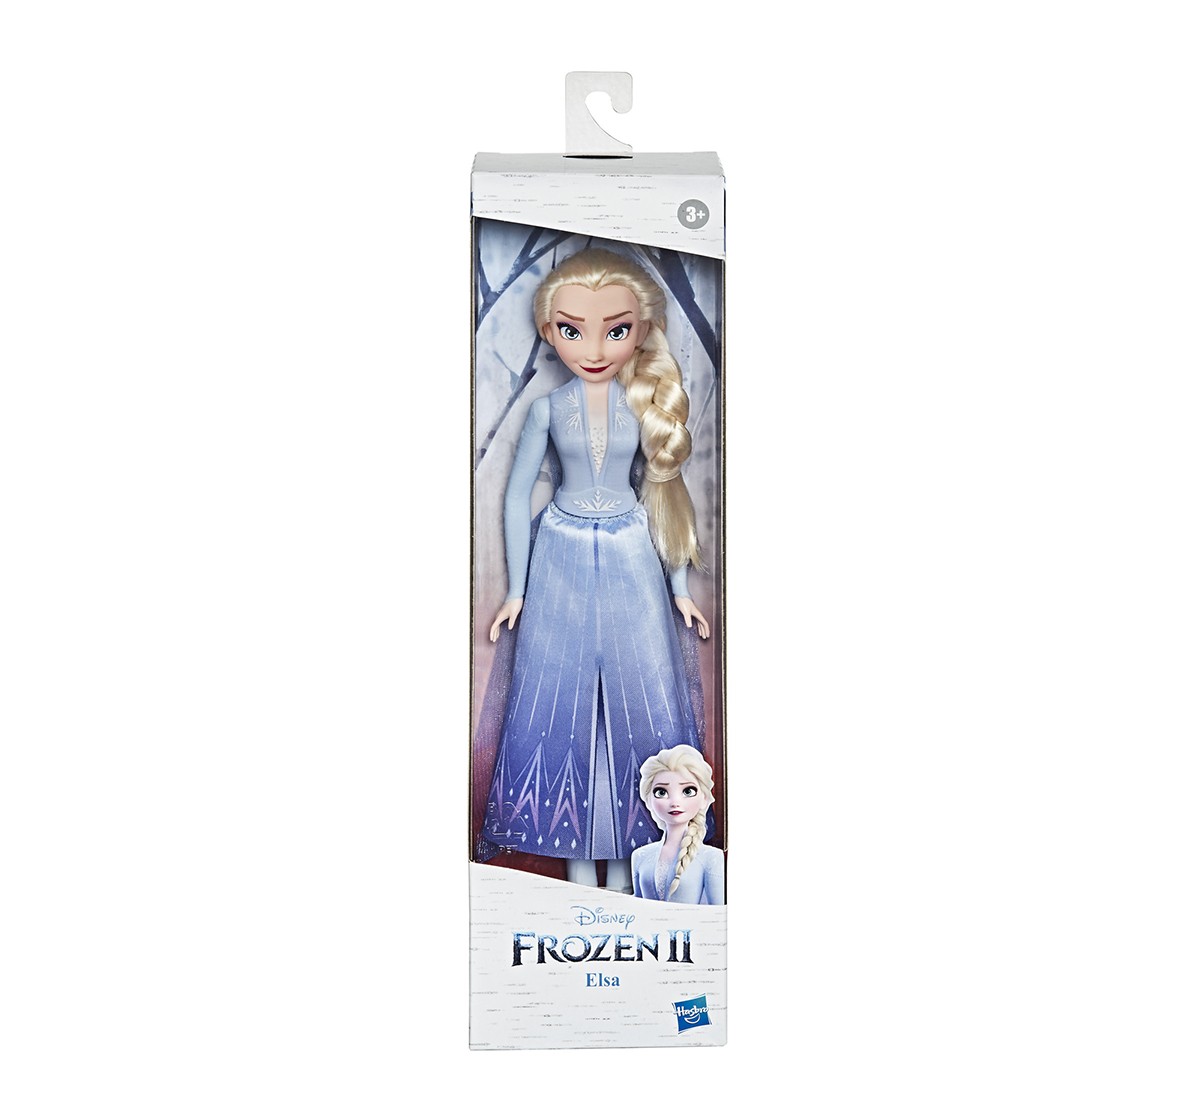 Disney's Frozen 2 Elsa Fashion Doll With Long Blonde Hair, Skirt, and Shoes, Elsa Toy Inspired by Disney's Frozen 2  Dolls & Accessories for age 3Y+ 